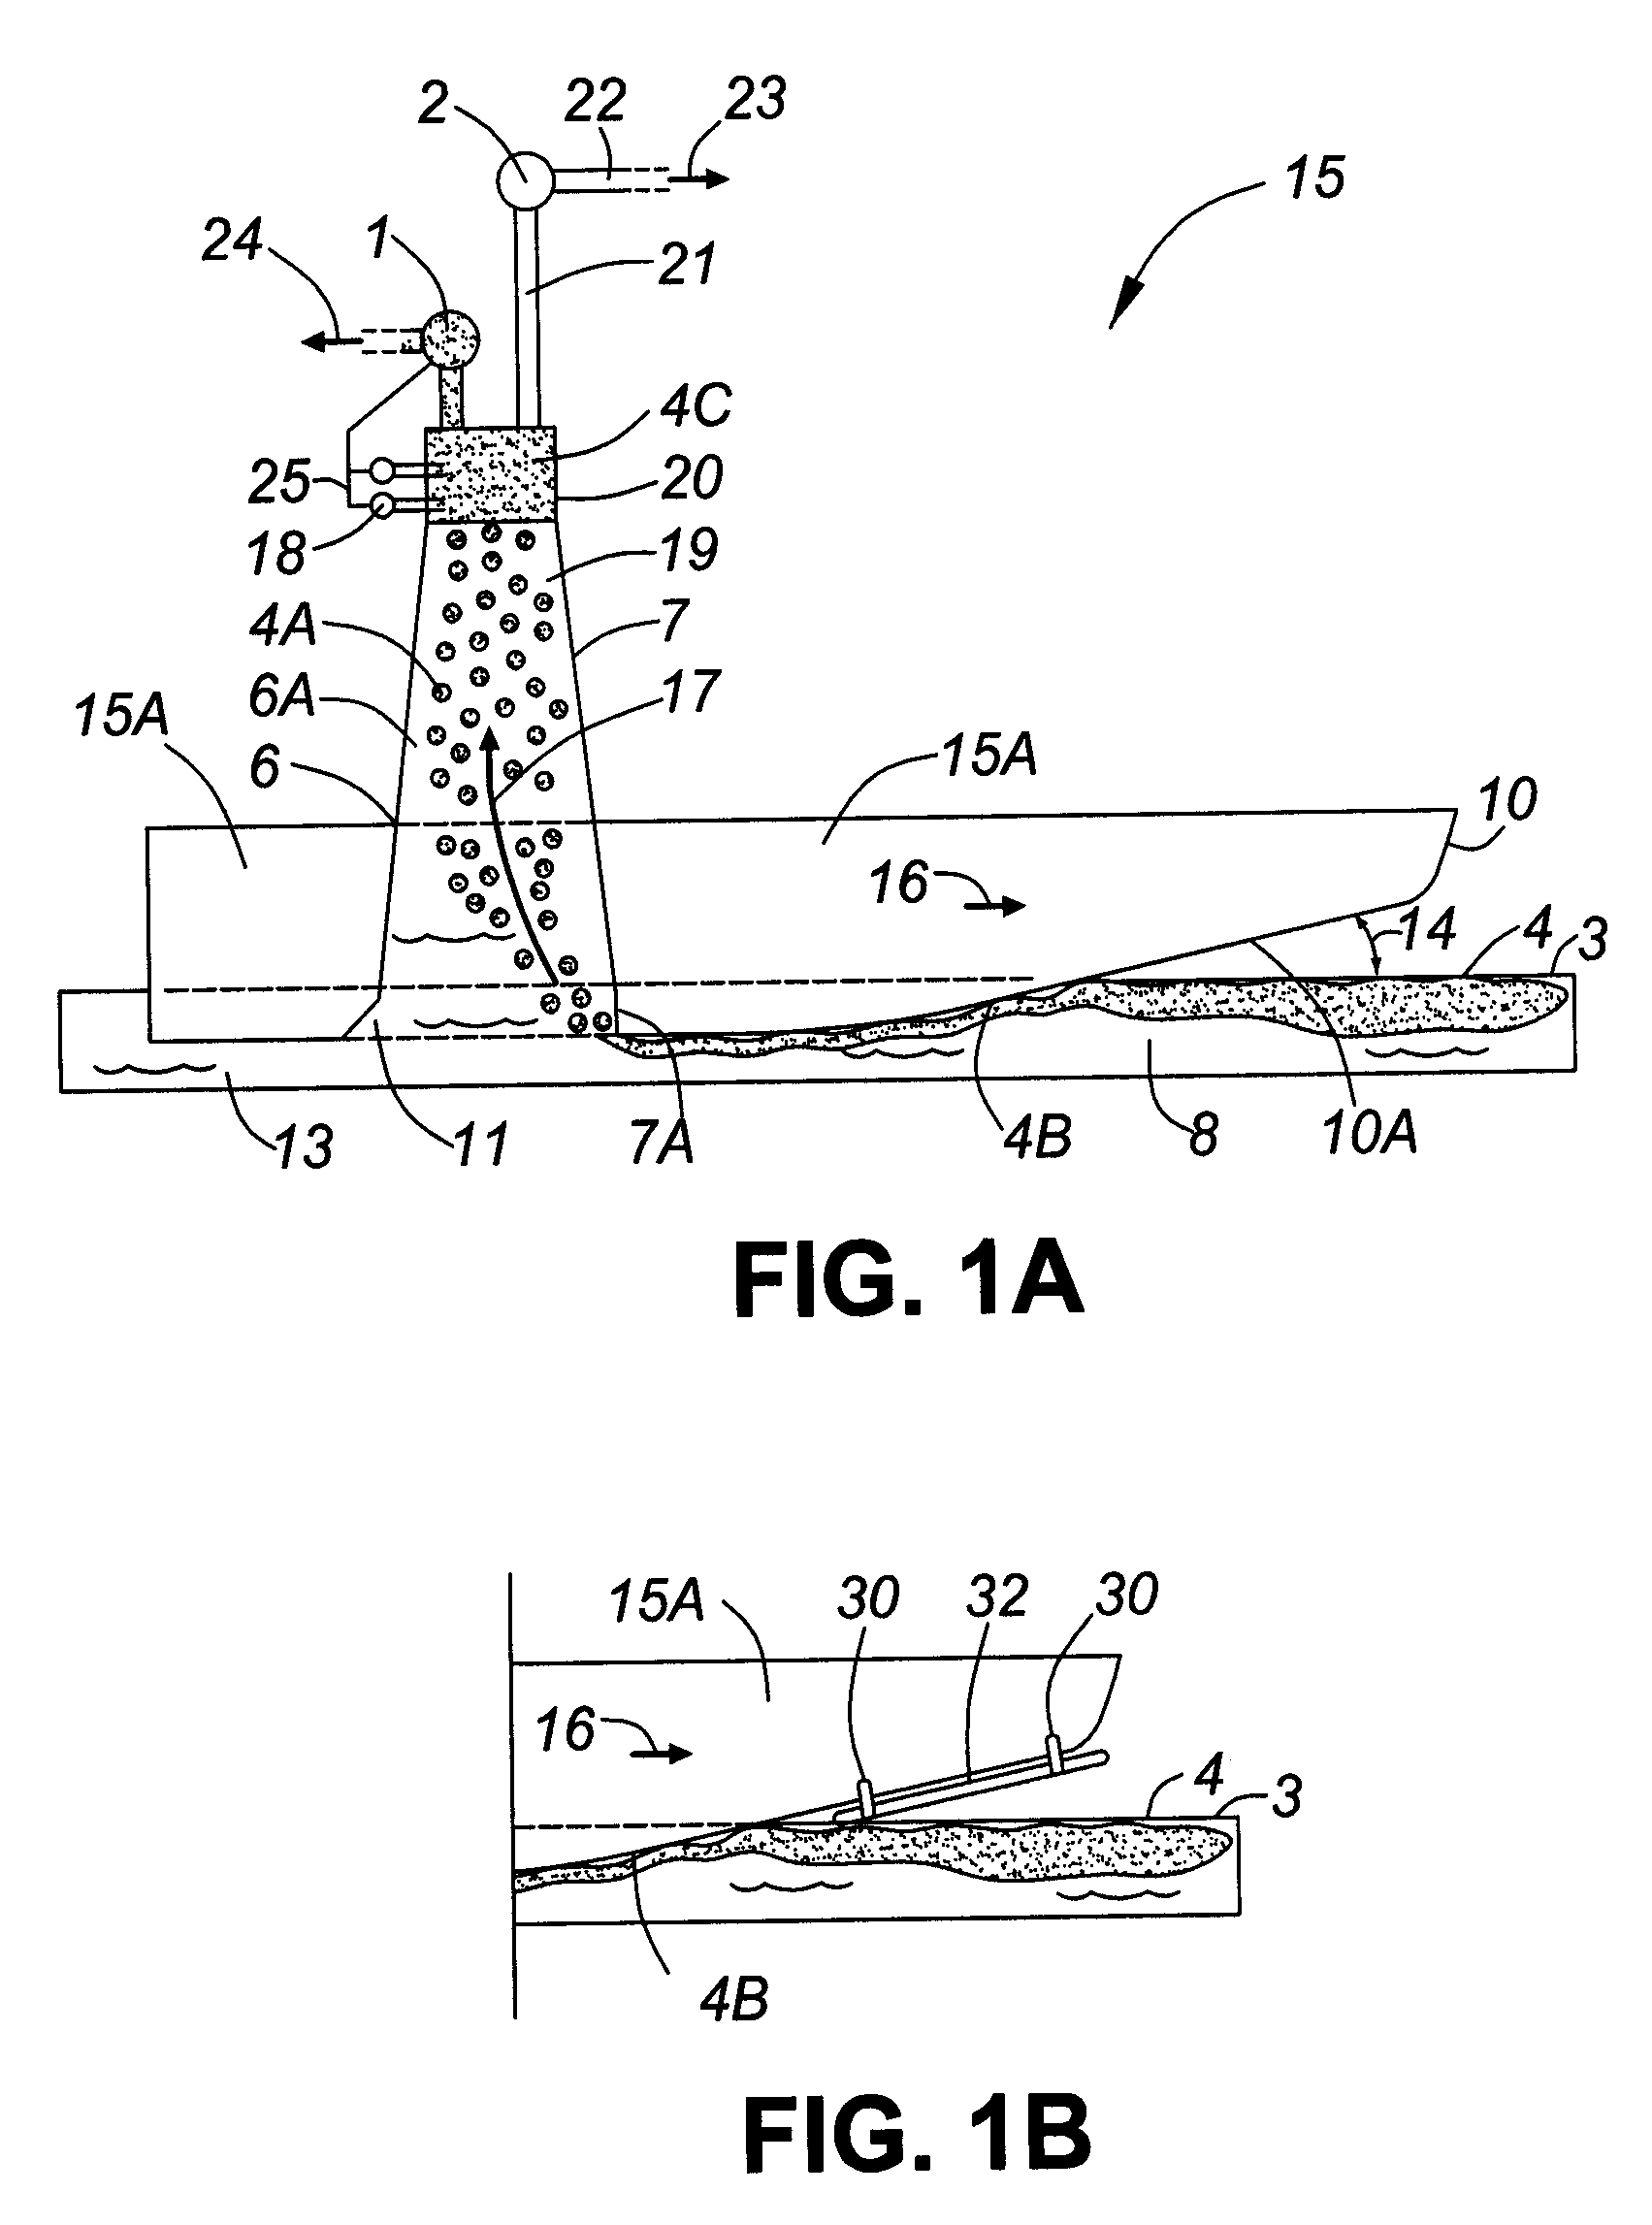 Device and method for cleaning up spilled oil and other liquids